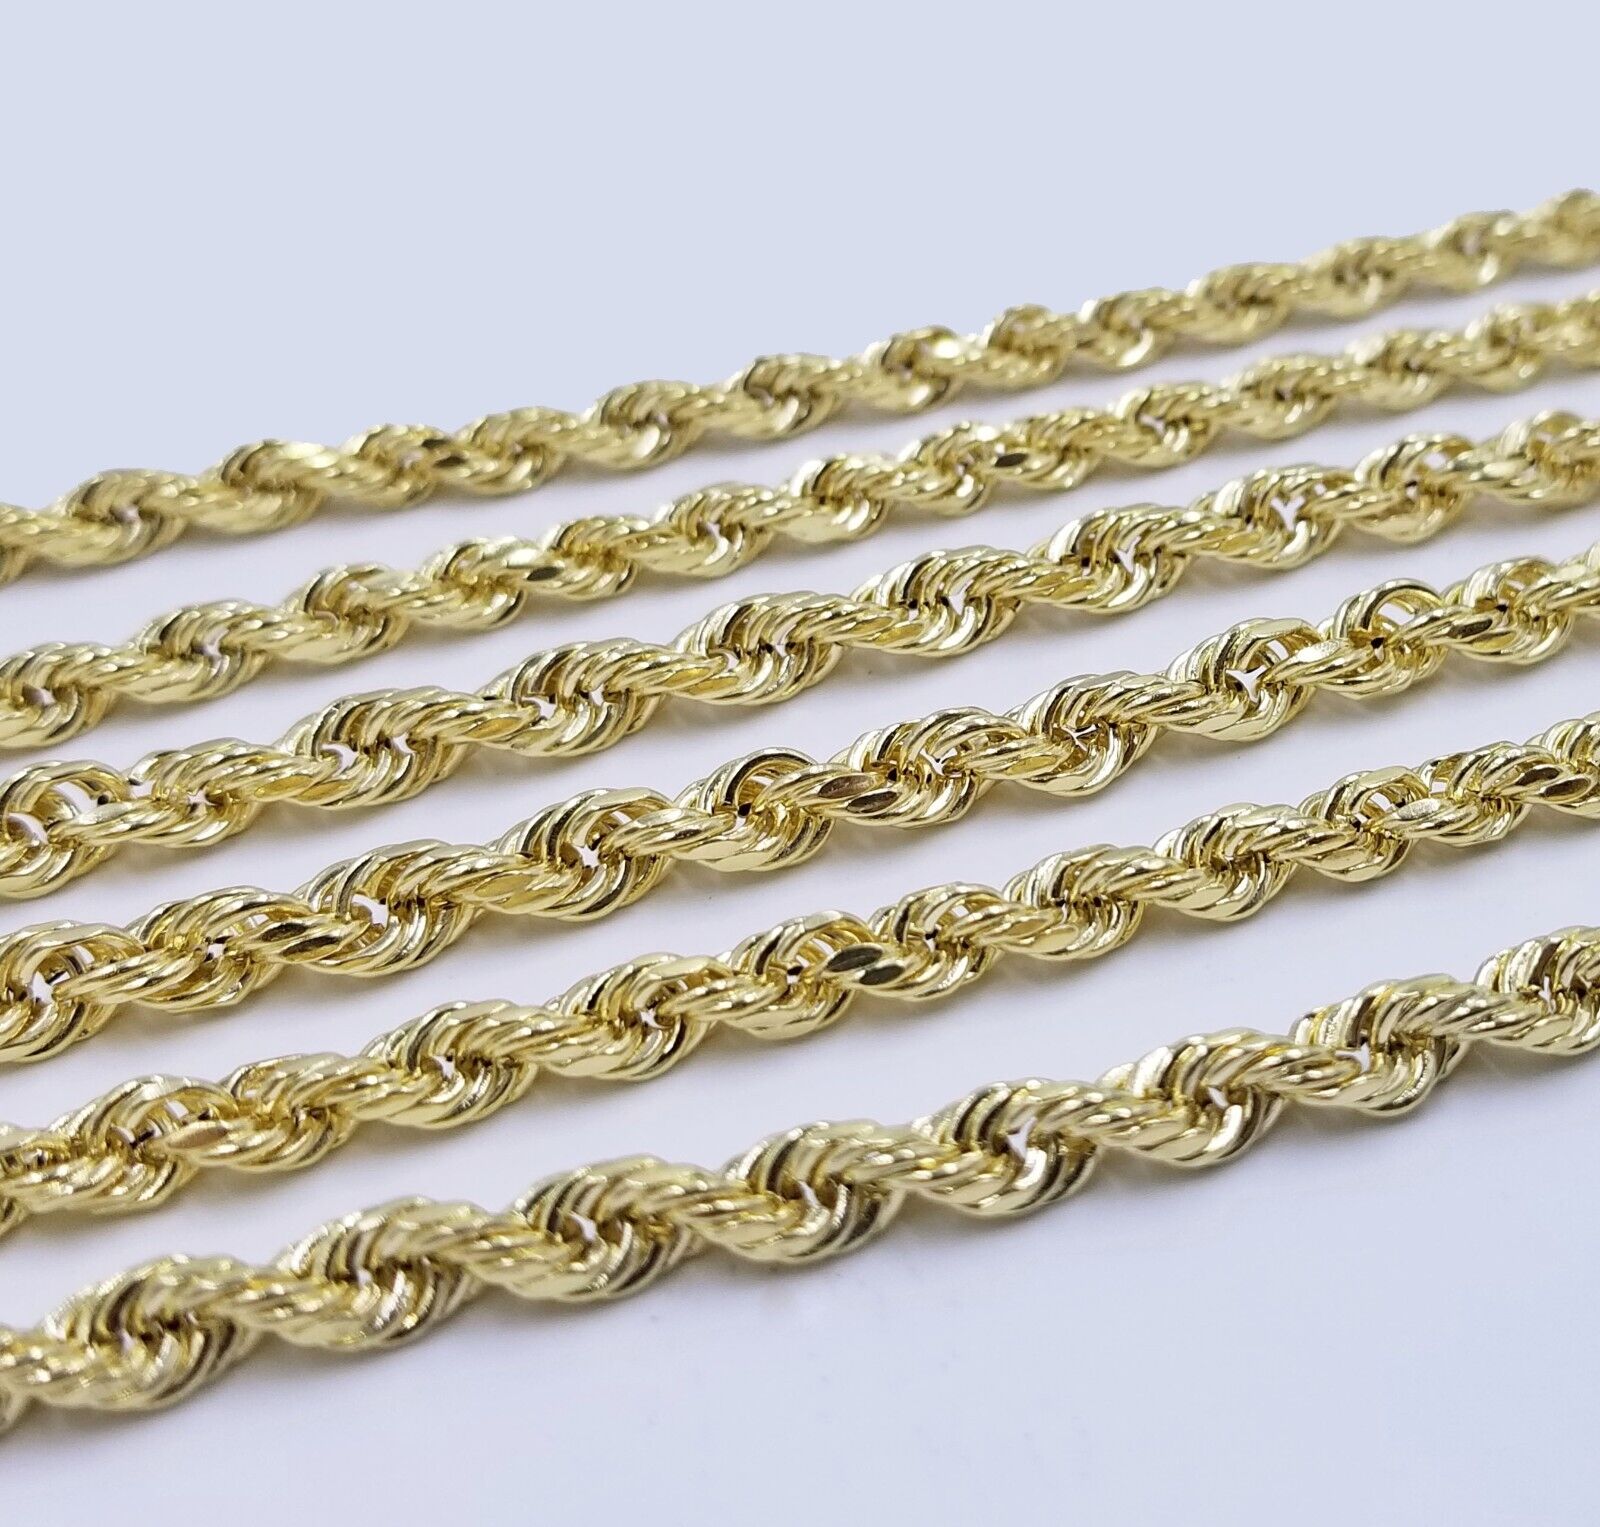 14K Yellow Gold Rope Chain Necklace 5mm -Unisex 22,24,26 Inch